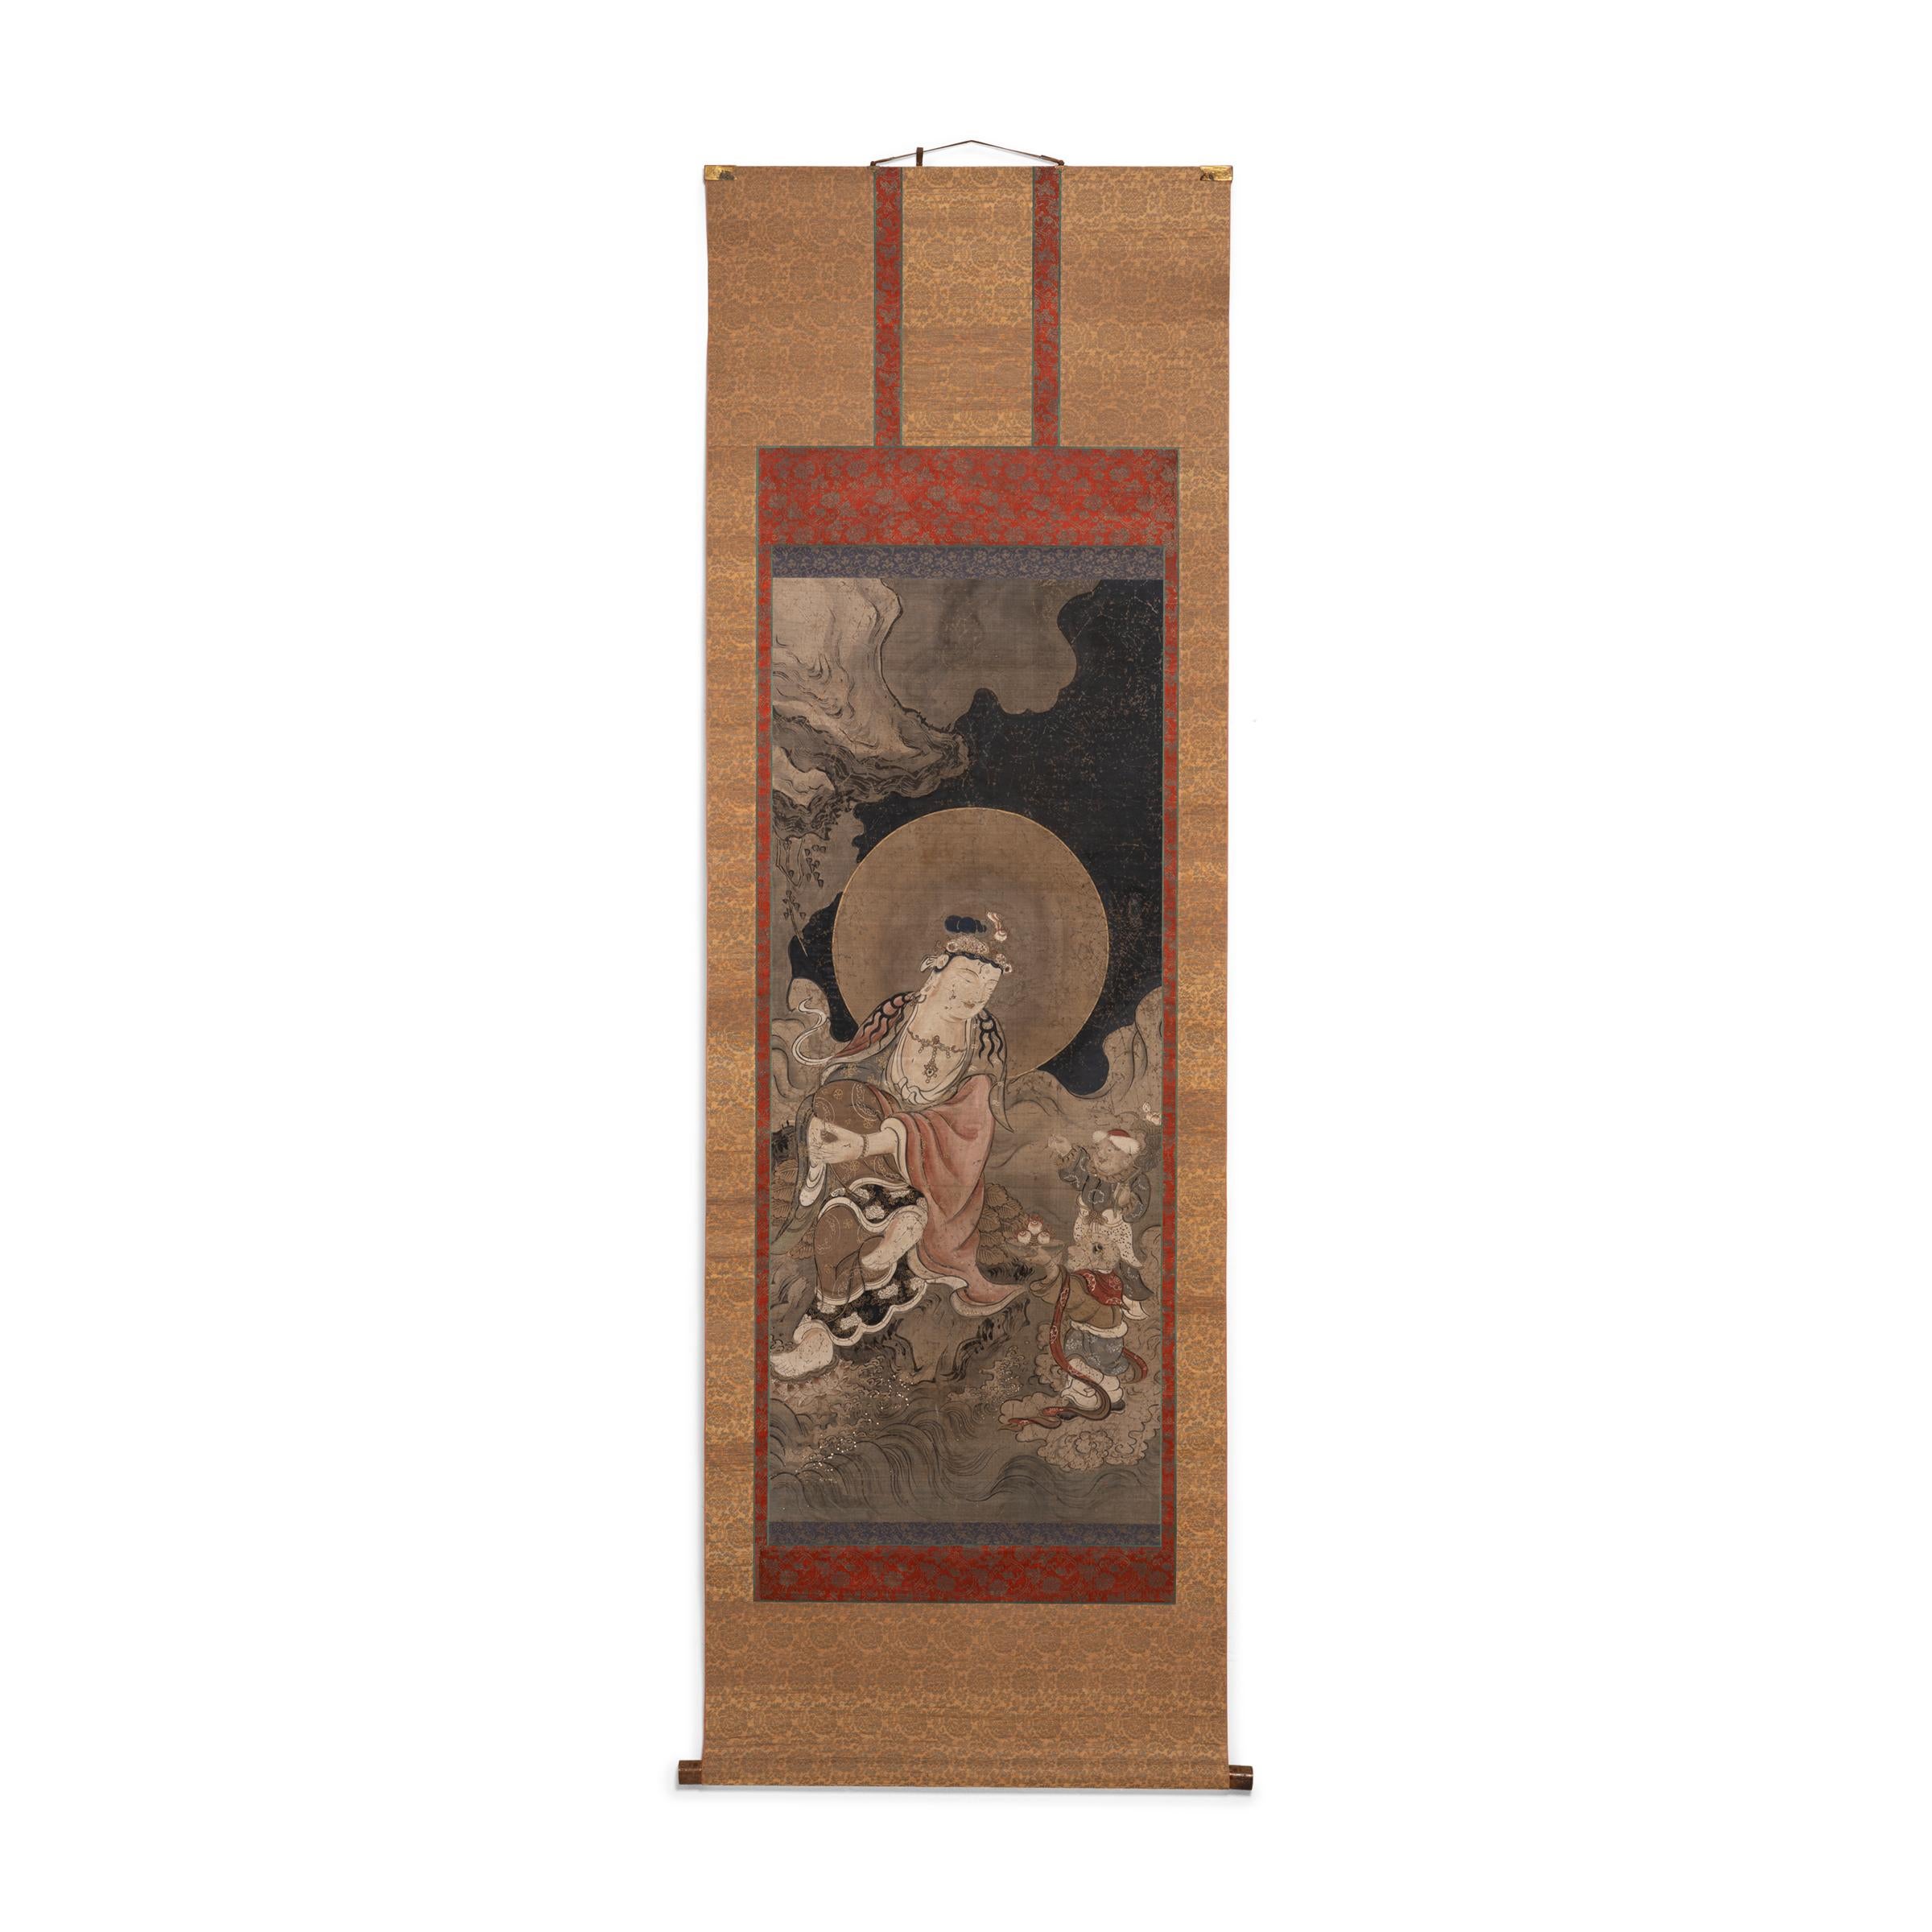 Unknown Portrait - Japanese Hanging Scroll of the Goddess of Mercy, c. 1800